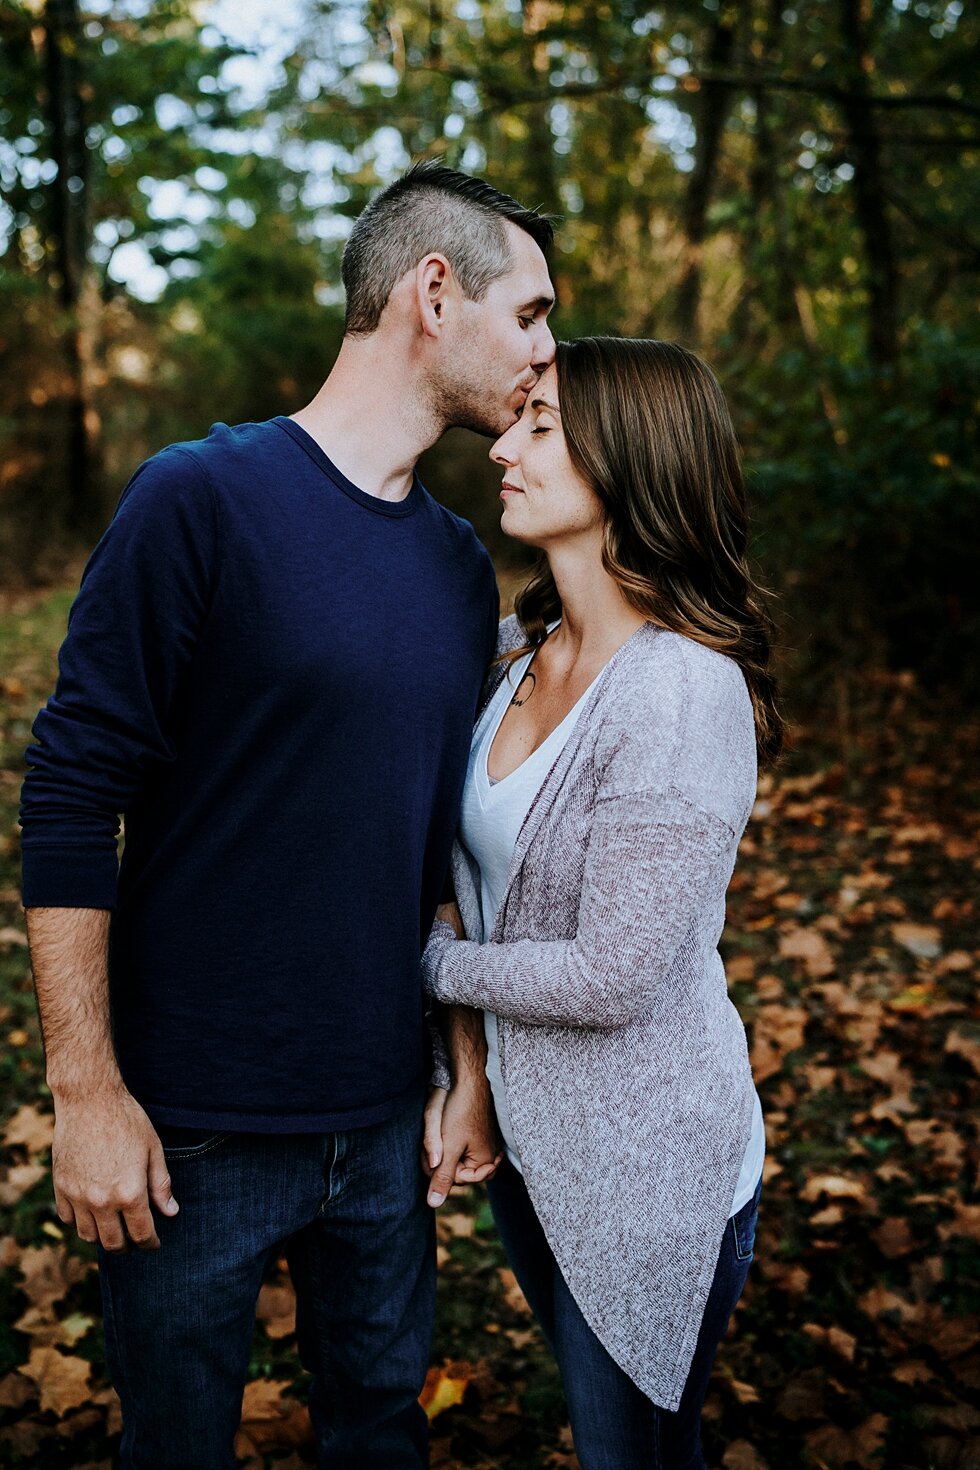  Tender kiss on the forehead between this engaged couple #engagementgoals #engagementphotographer #engaged #outdoorengagement #kentuckyphotographer #indianaphotographer #louisvillephotographer #engagementphotos #savethedatephotos #savethedates #engag